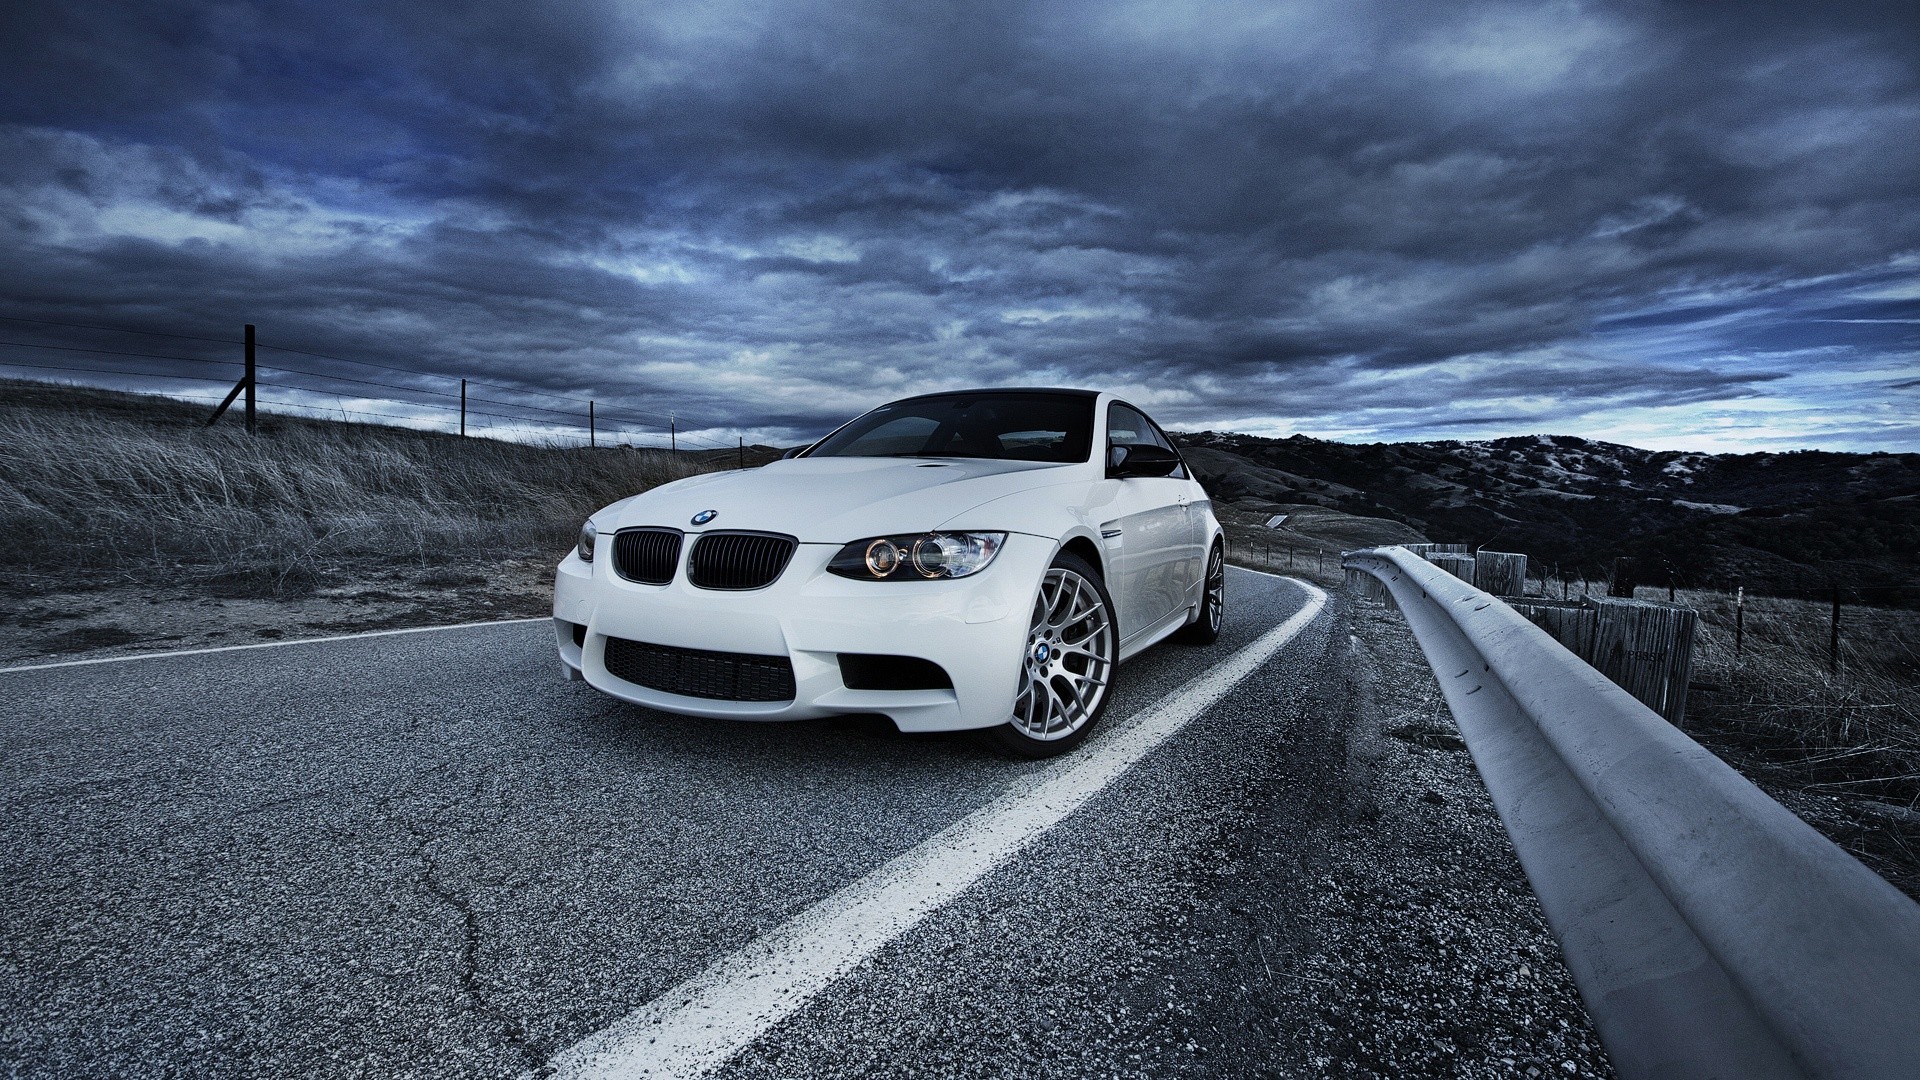 Wallpapers BMW BMW M3 clouds on the desktop